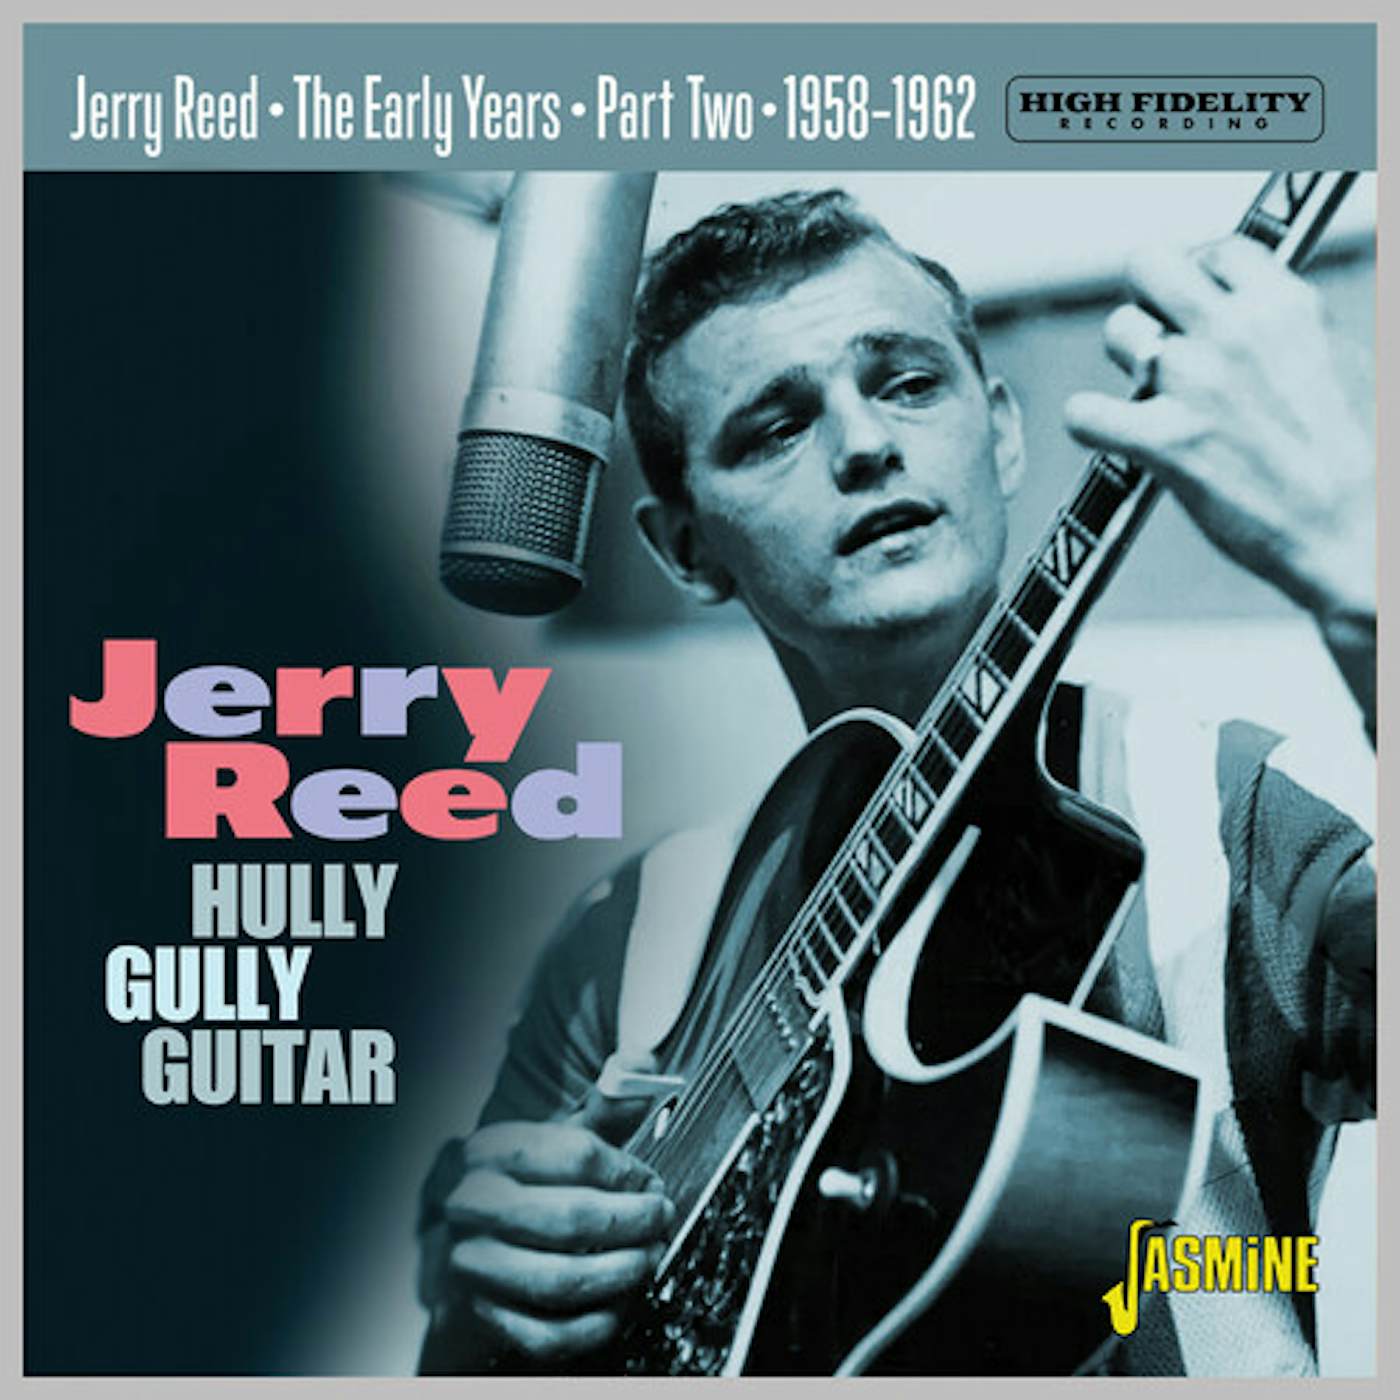 Jerry Reed EARLY YEARS PART 2: HULLY GULLY GUITAR 1958-1962 CD